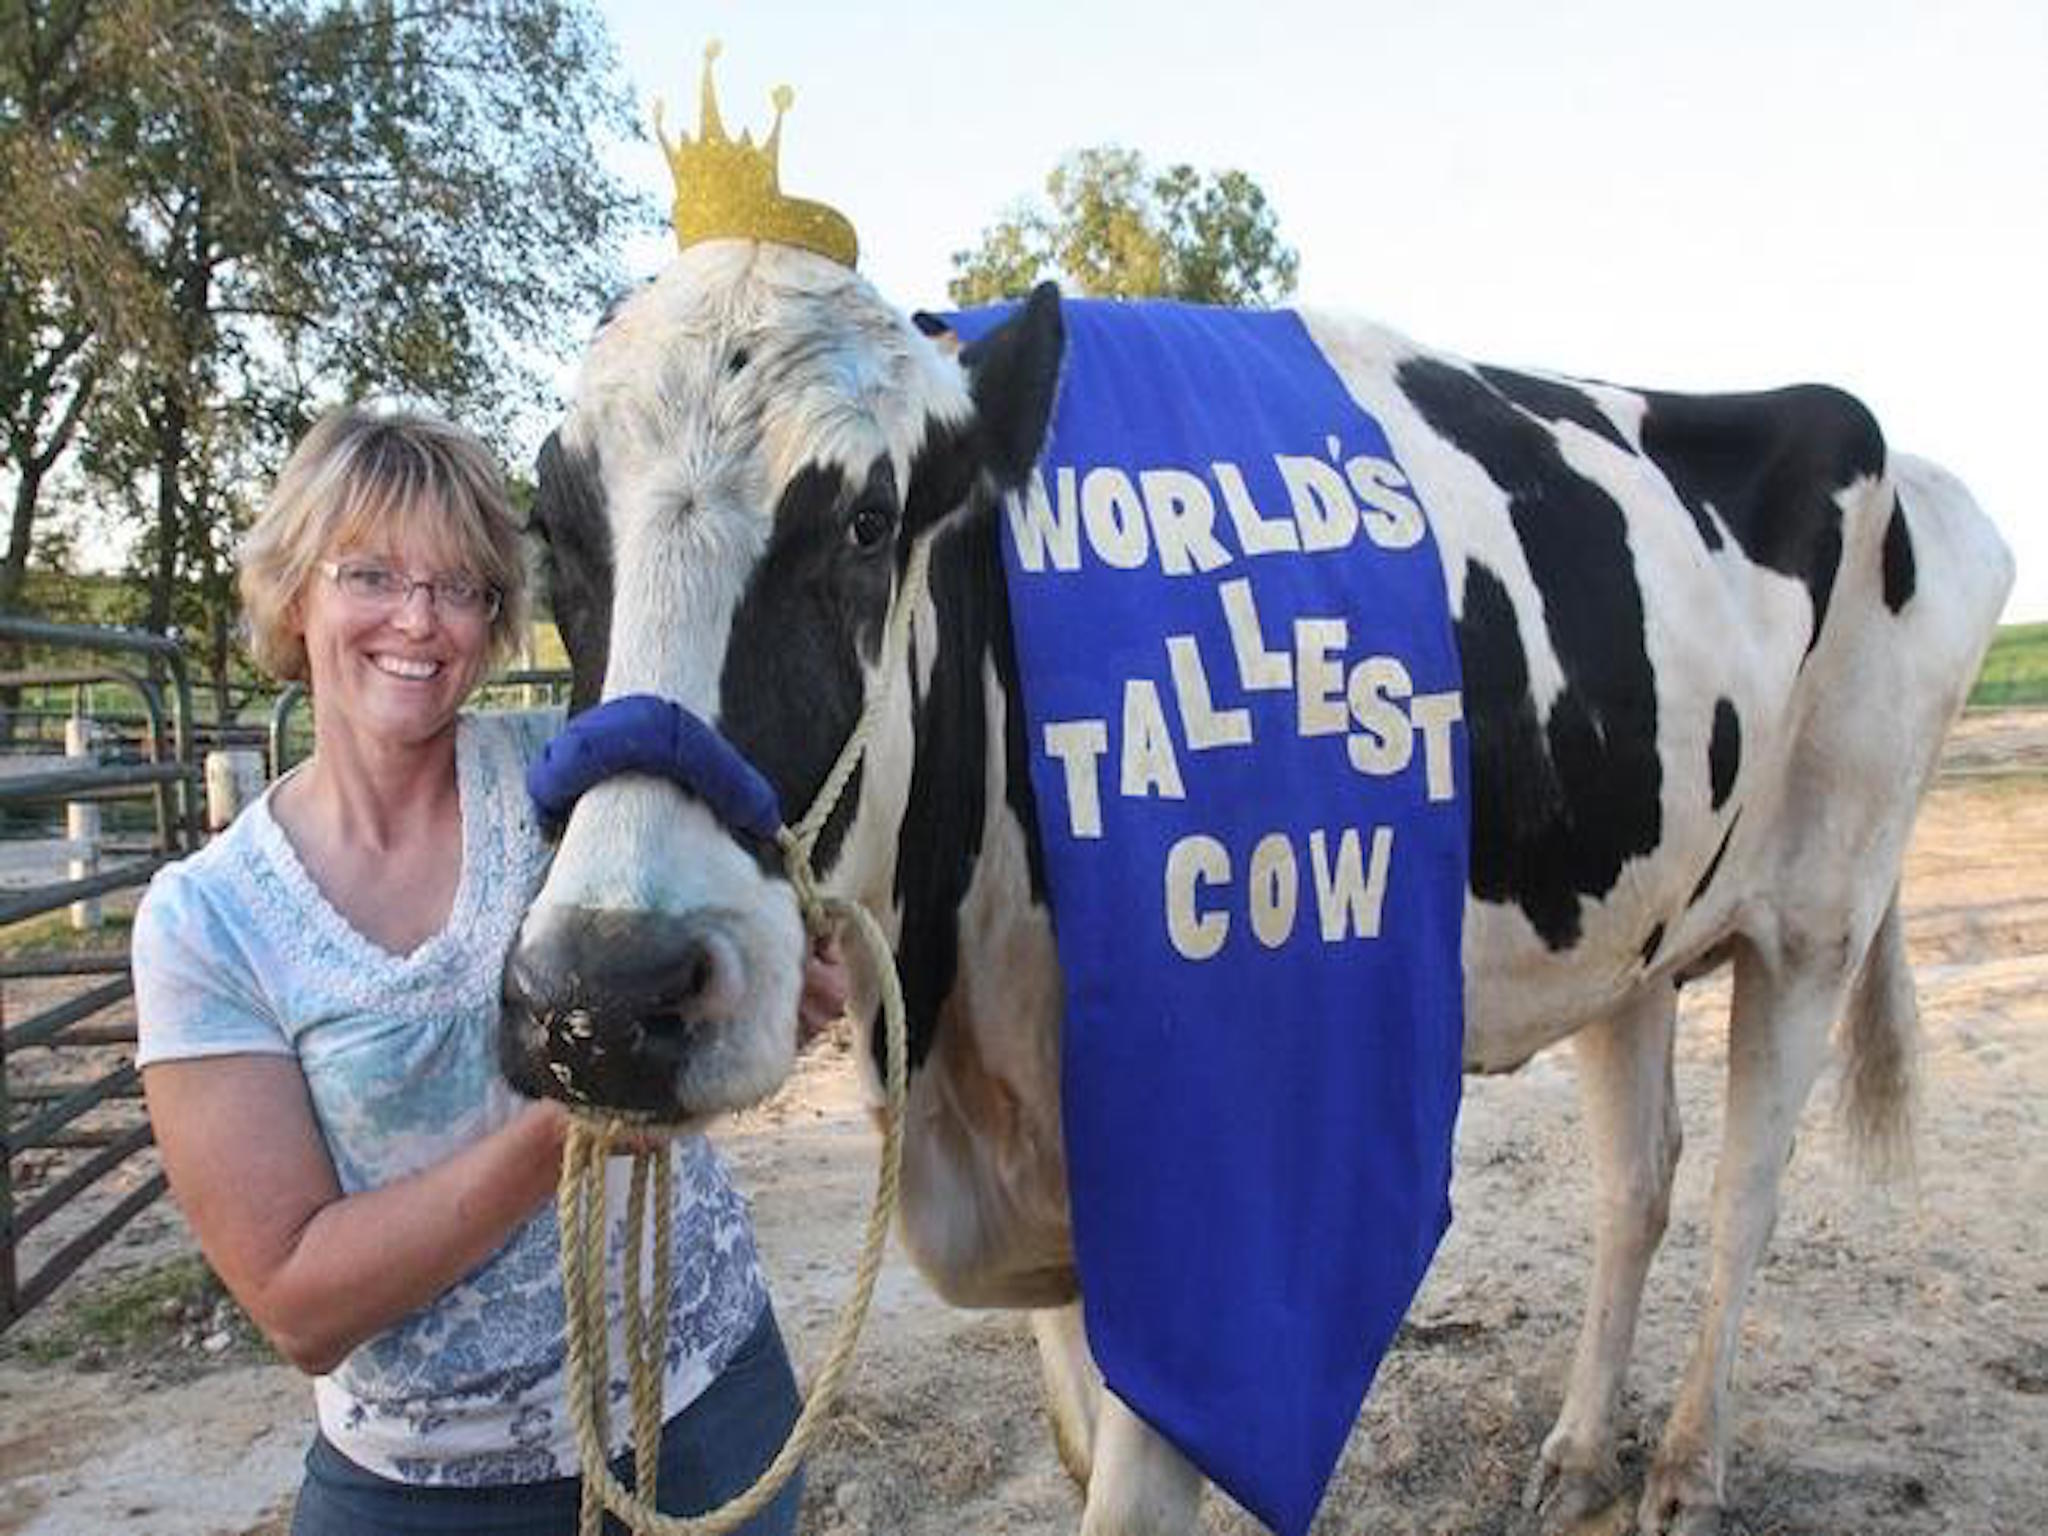 Blosom the world's tallest cow with Pat Hanson